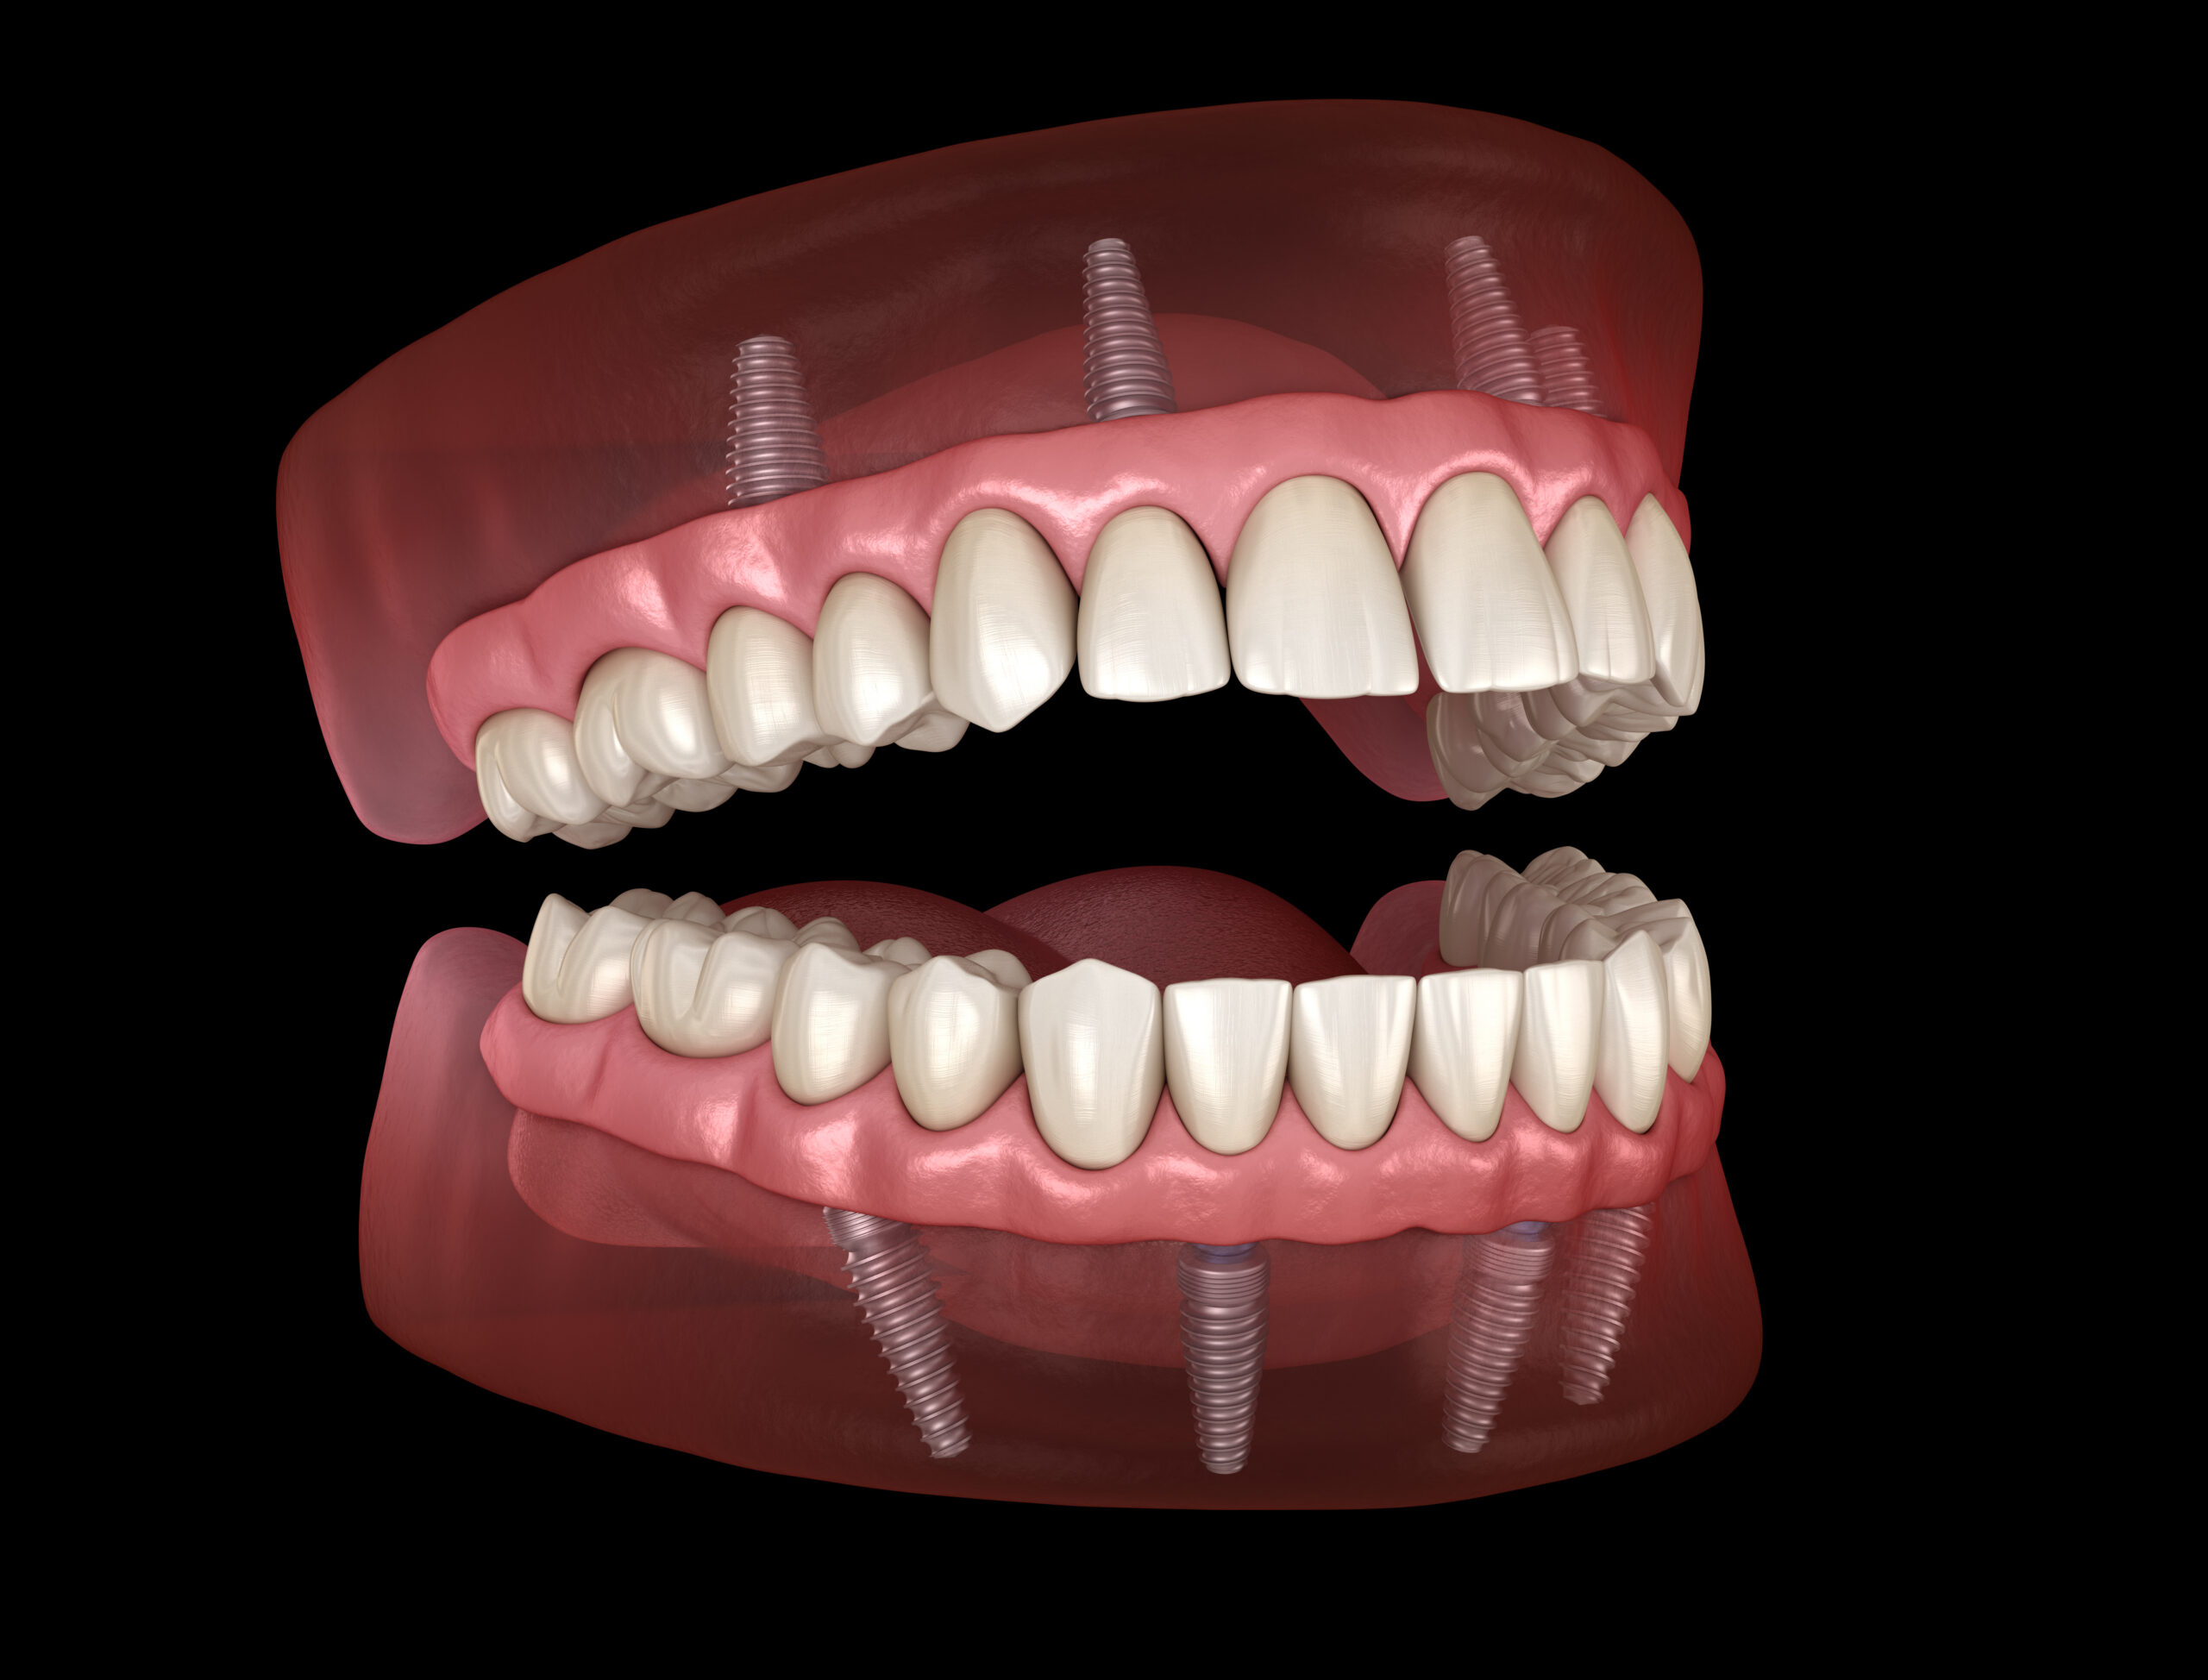 3D model of an all-on-four dental implants in Toledo, OH.